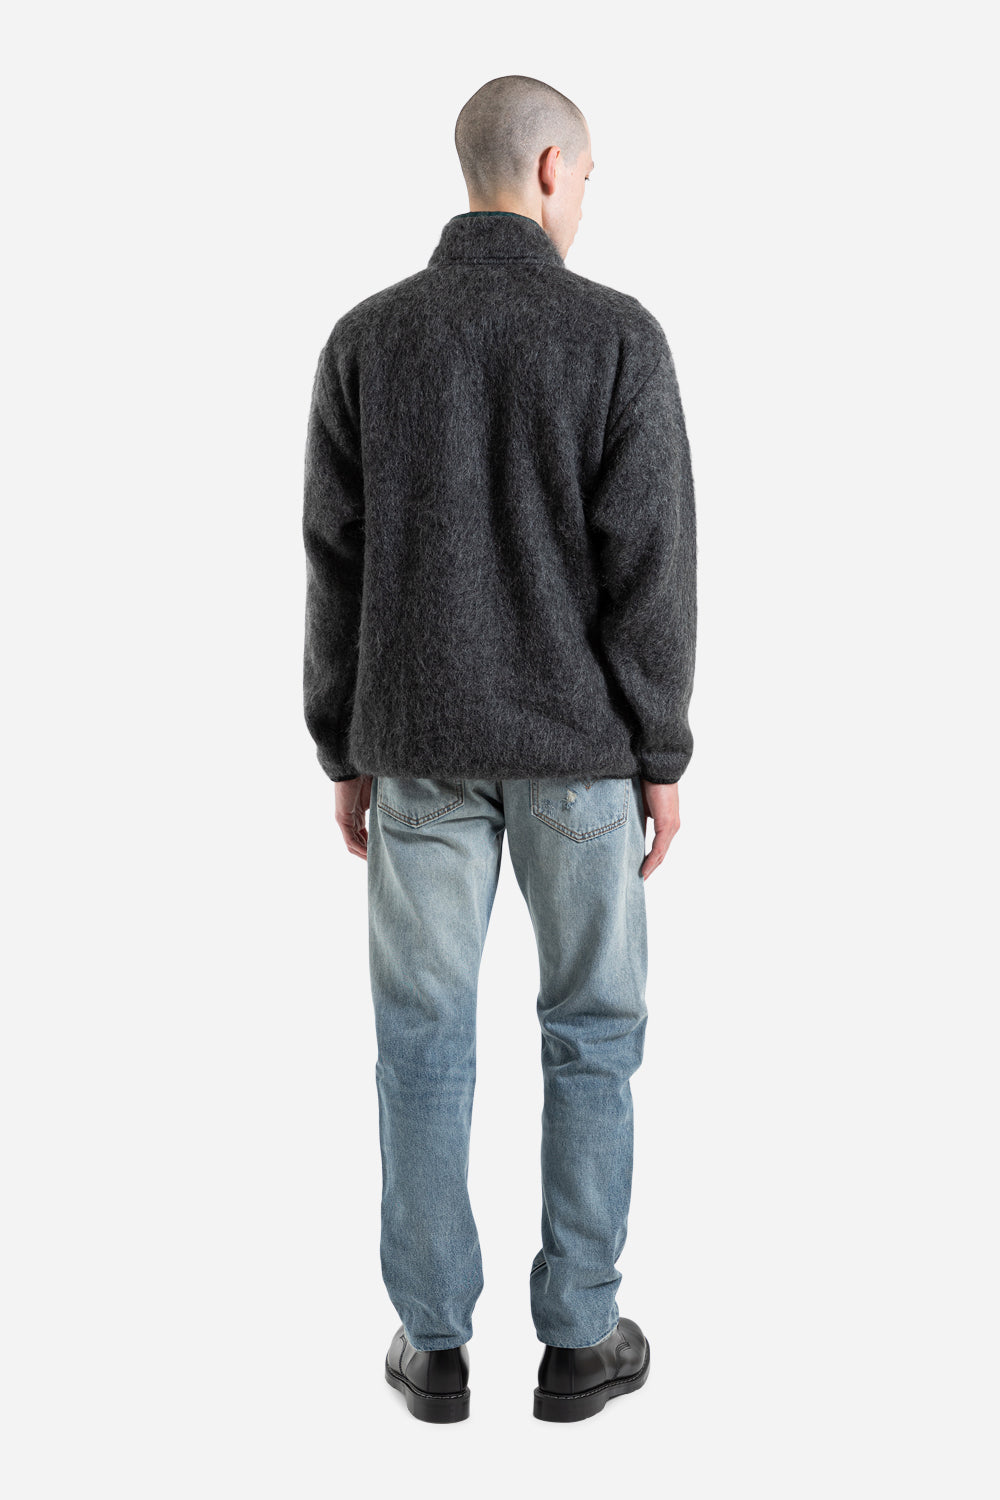 Nanamica Pullover Sweater in Charcoal